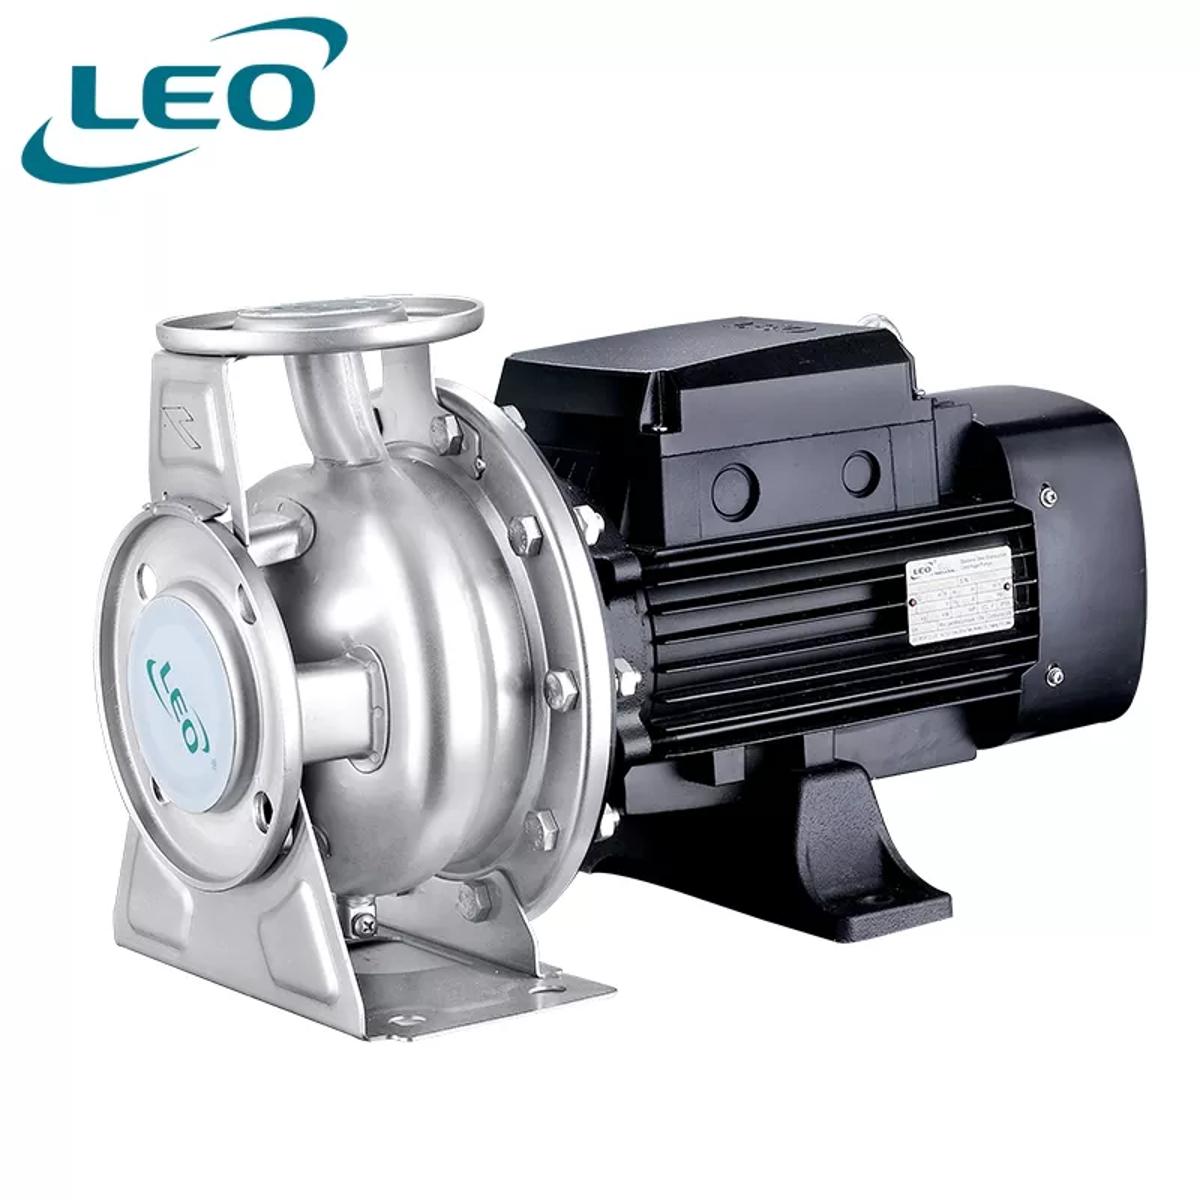 LEO - XZS-65-50-160-75 - 7500 W - 10 HP - Clean Water Stainless Steel HEAVY DUTY Centrifugal Pump FLANGE TYPE  - 380V~400V THREE PHASE - SIZE :- 2 1-2 " x 2 " - European STANDARD